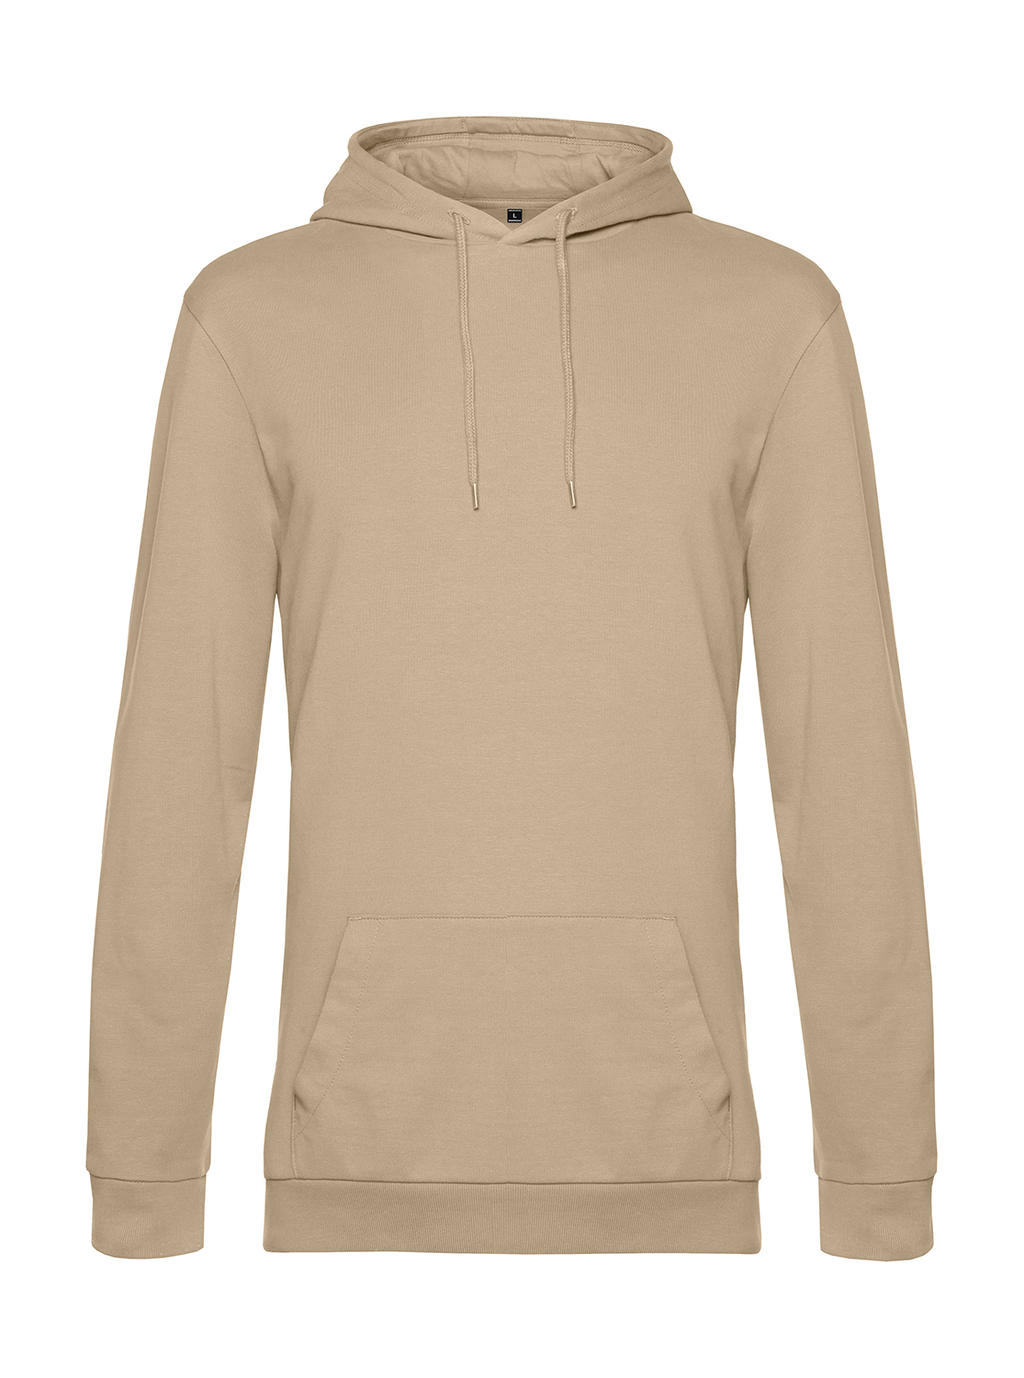  #Hoodie French Terry in Farbe Desert